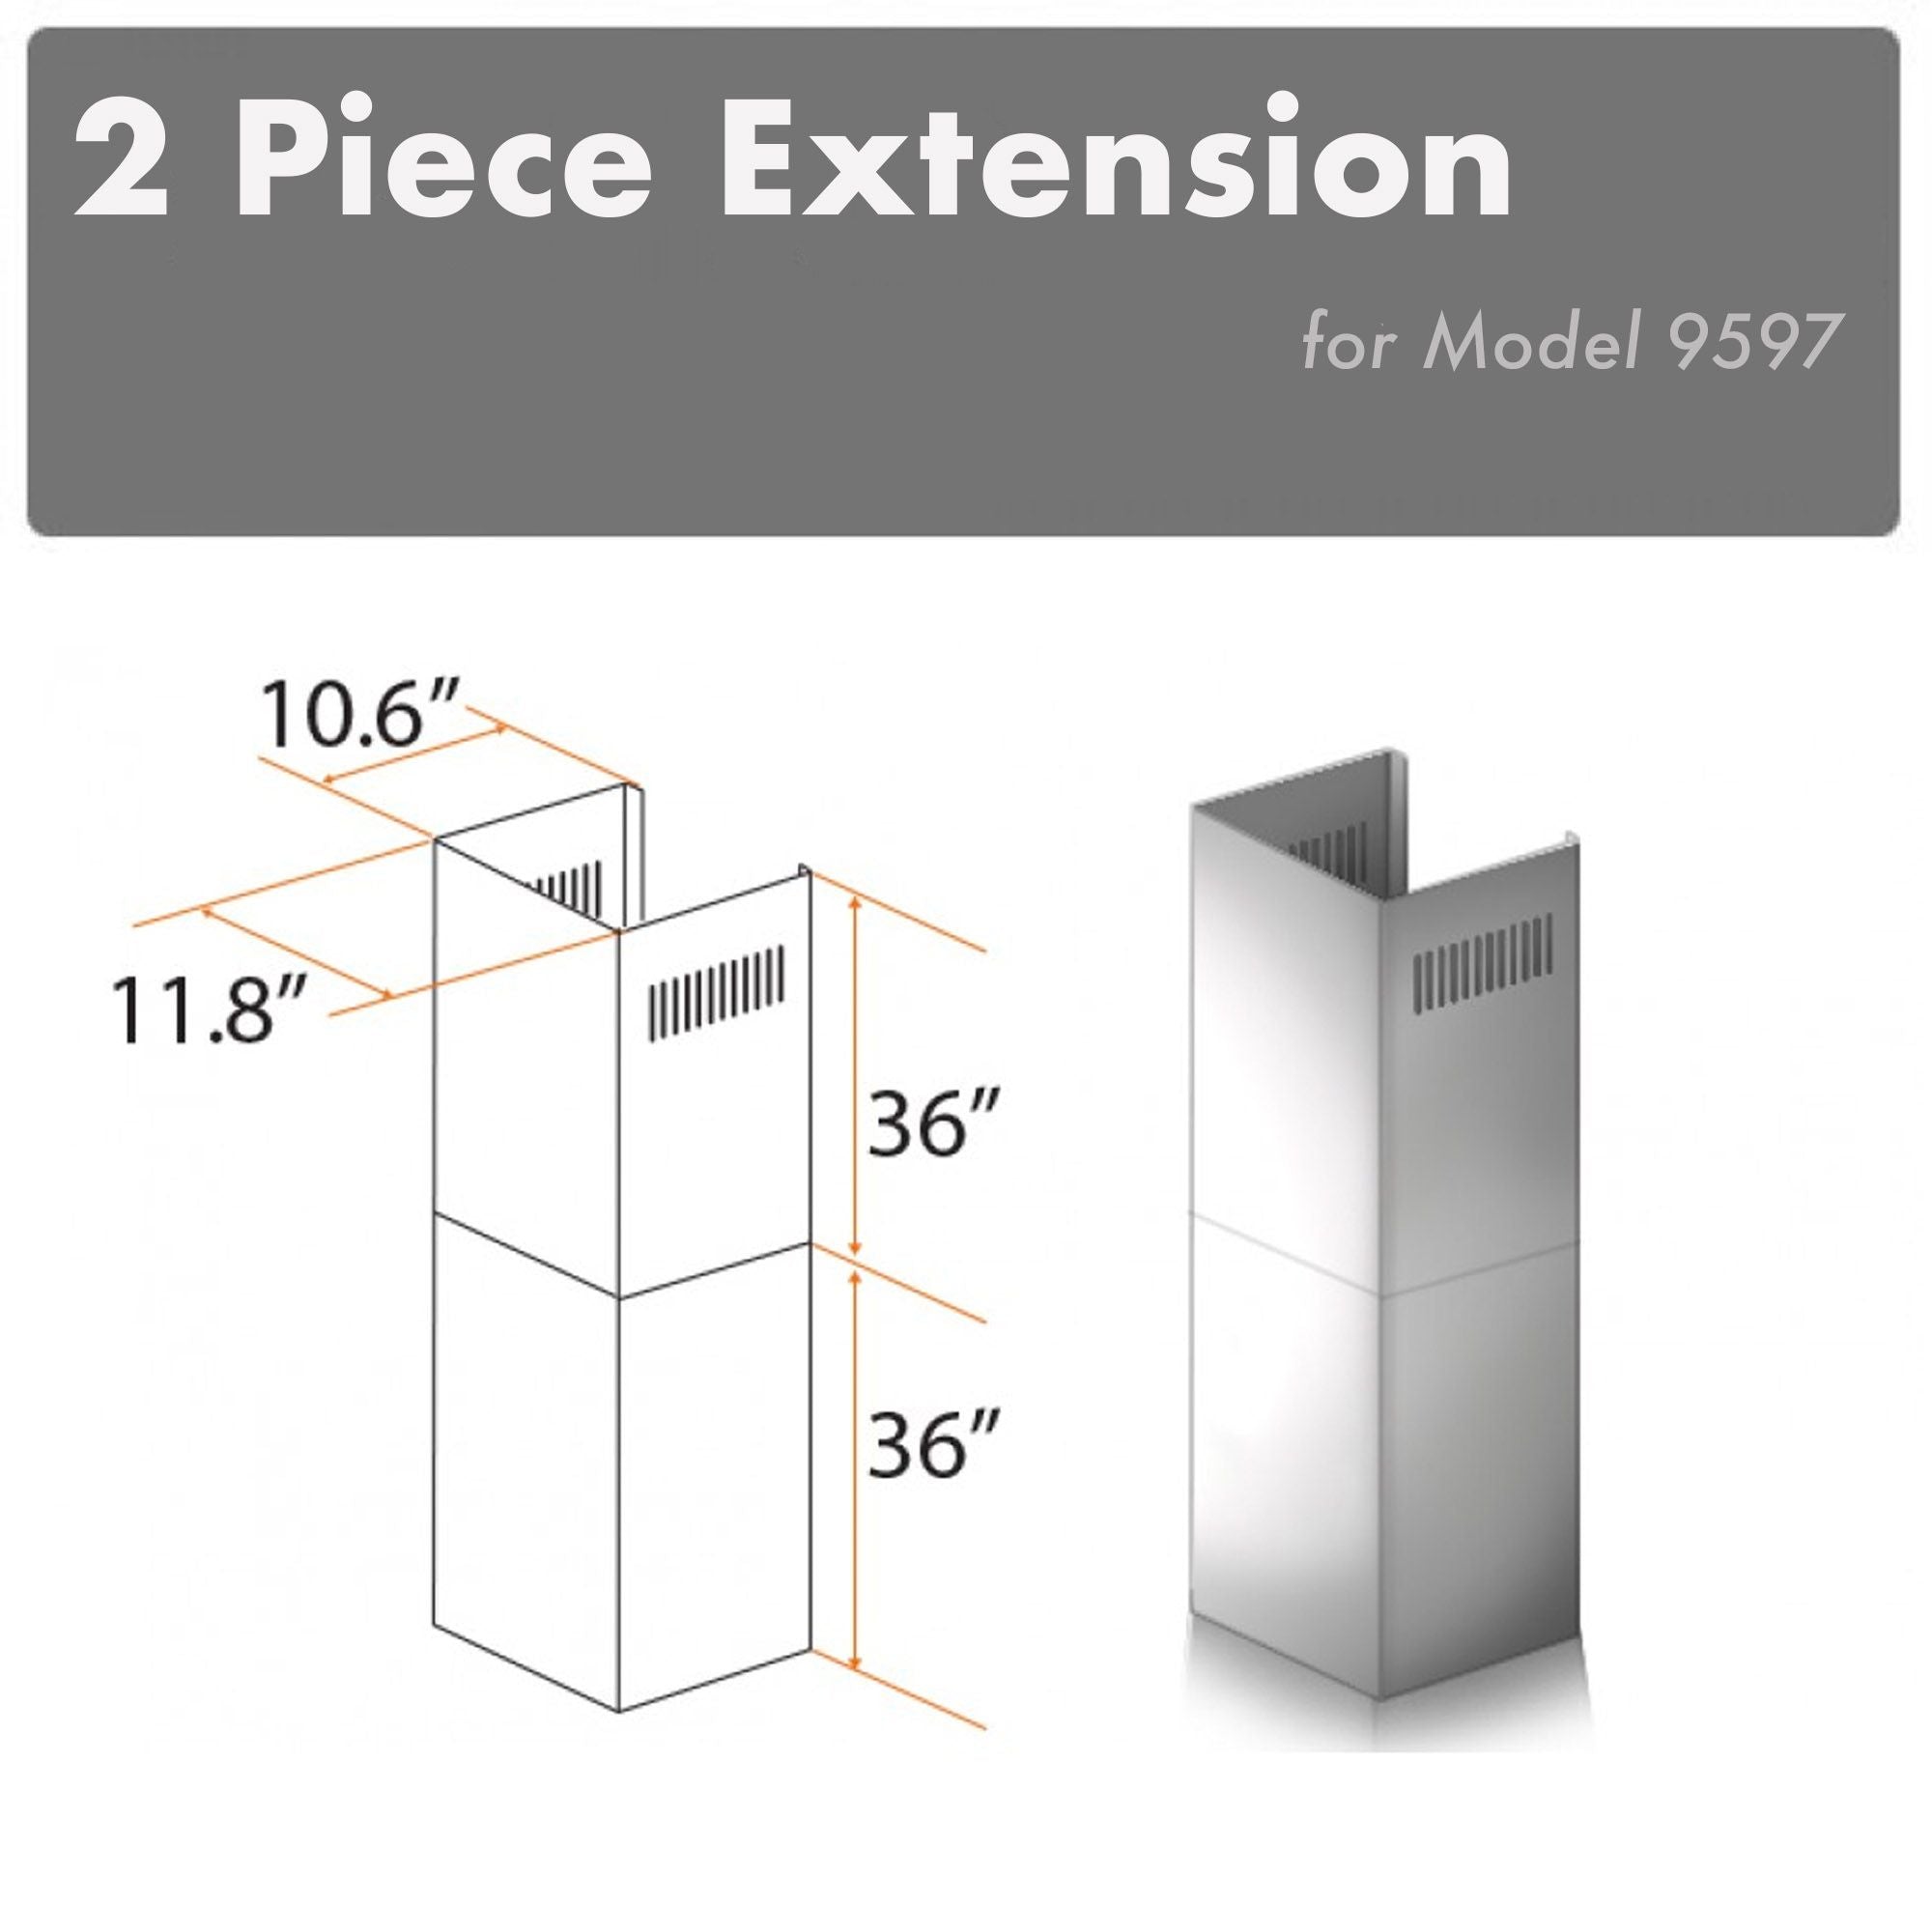 ZLINE Kitchen and Bath, ZLINE 2-36" Chimney Extensions for 10 ft. to 12 ft. Ceilings (2PCEXT-9597), 2PCEXT-9597,